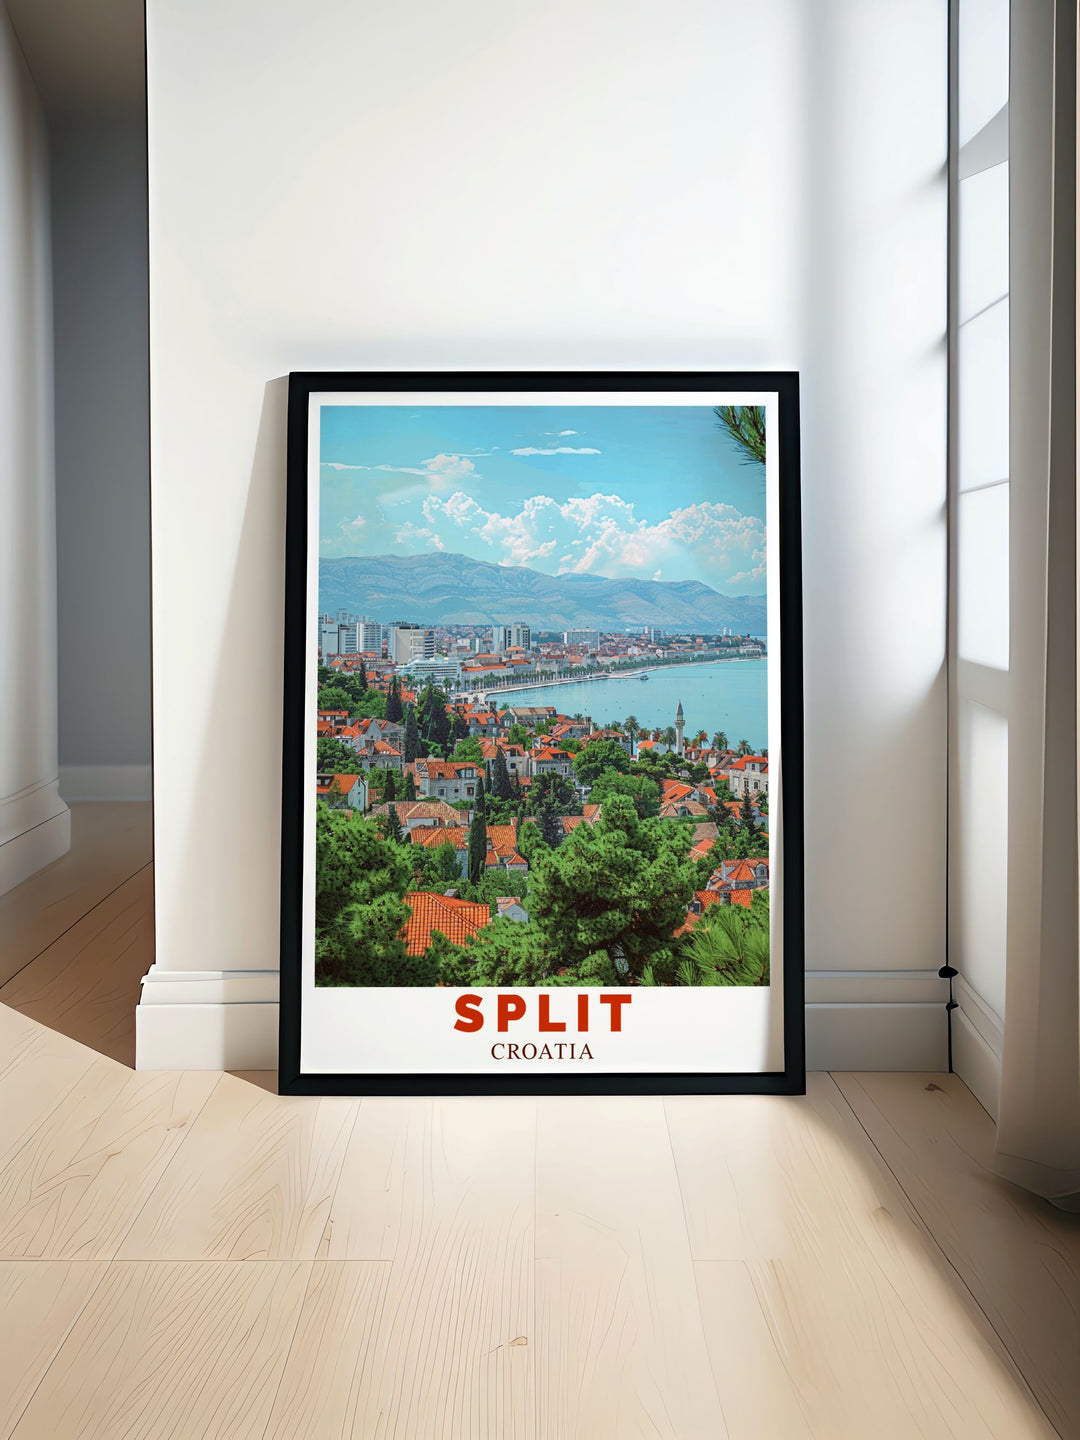 This travel poster highlights the dynamic culture of Split, inviting viewers to experience the vibrant streets and scenic views from Marjan Hill in Croatia.